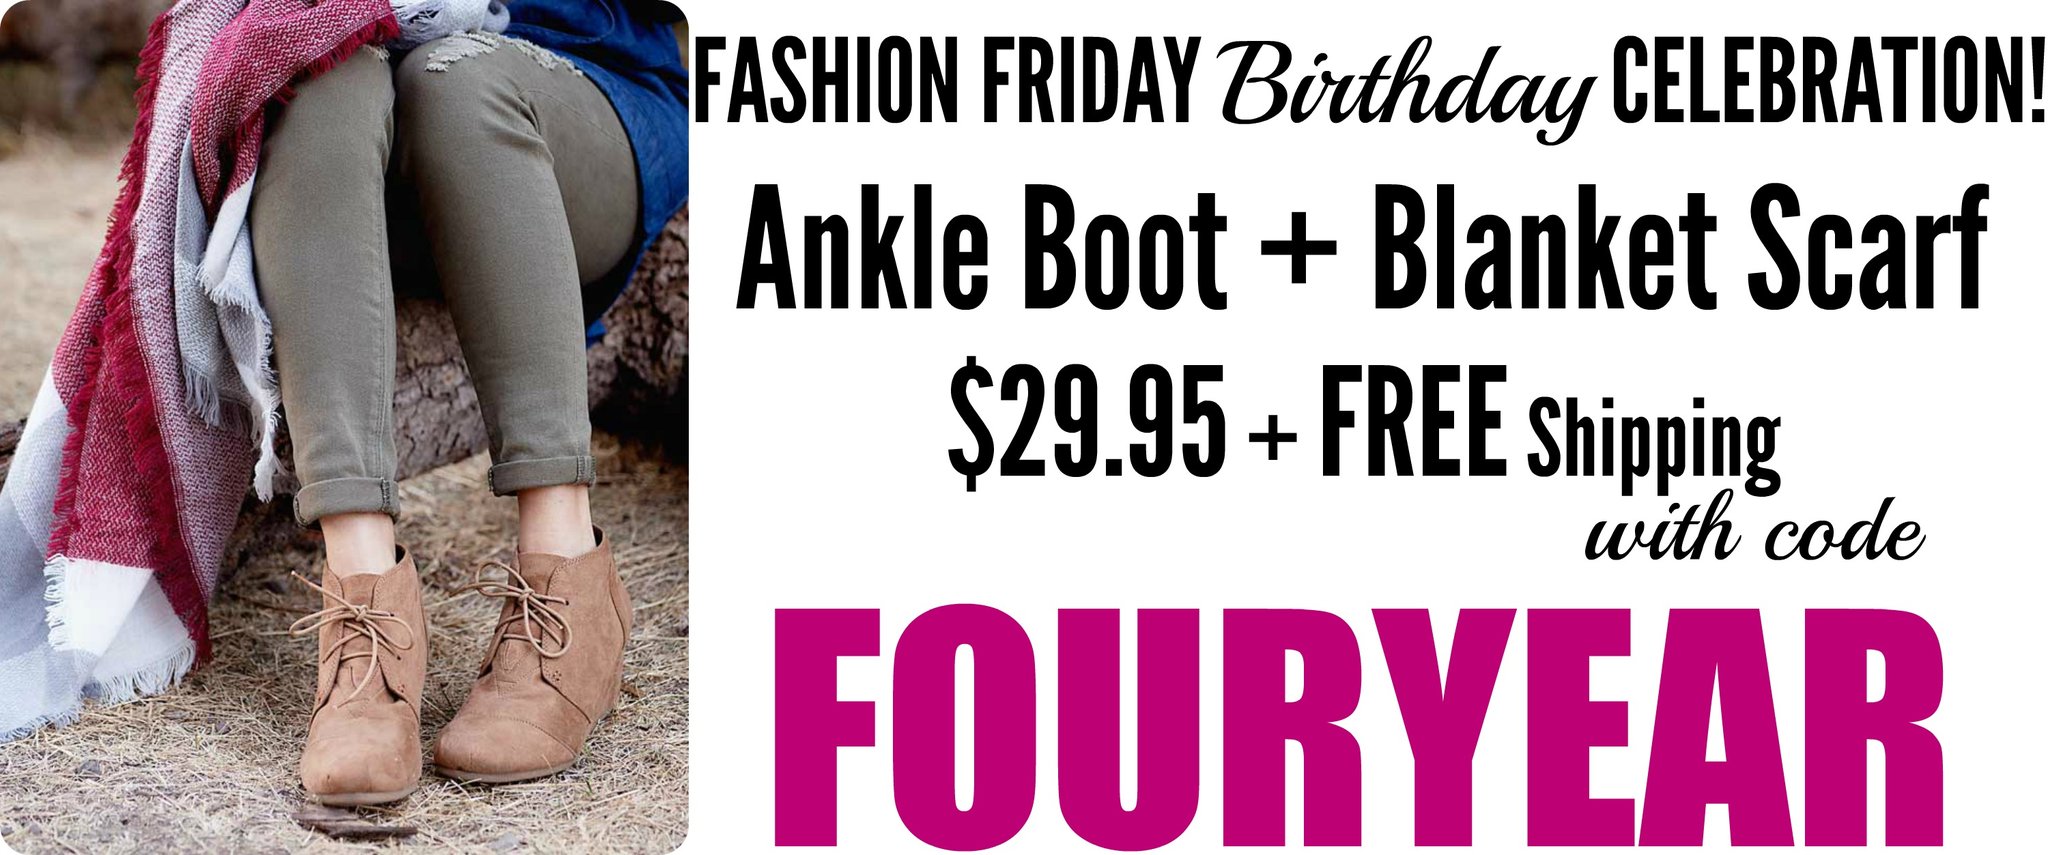 Fashion Friday! Ankle Boots w/ Blanket Scarves – Just $29.95! Free shipping!